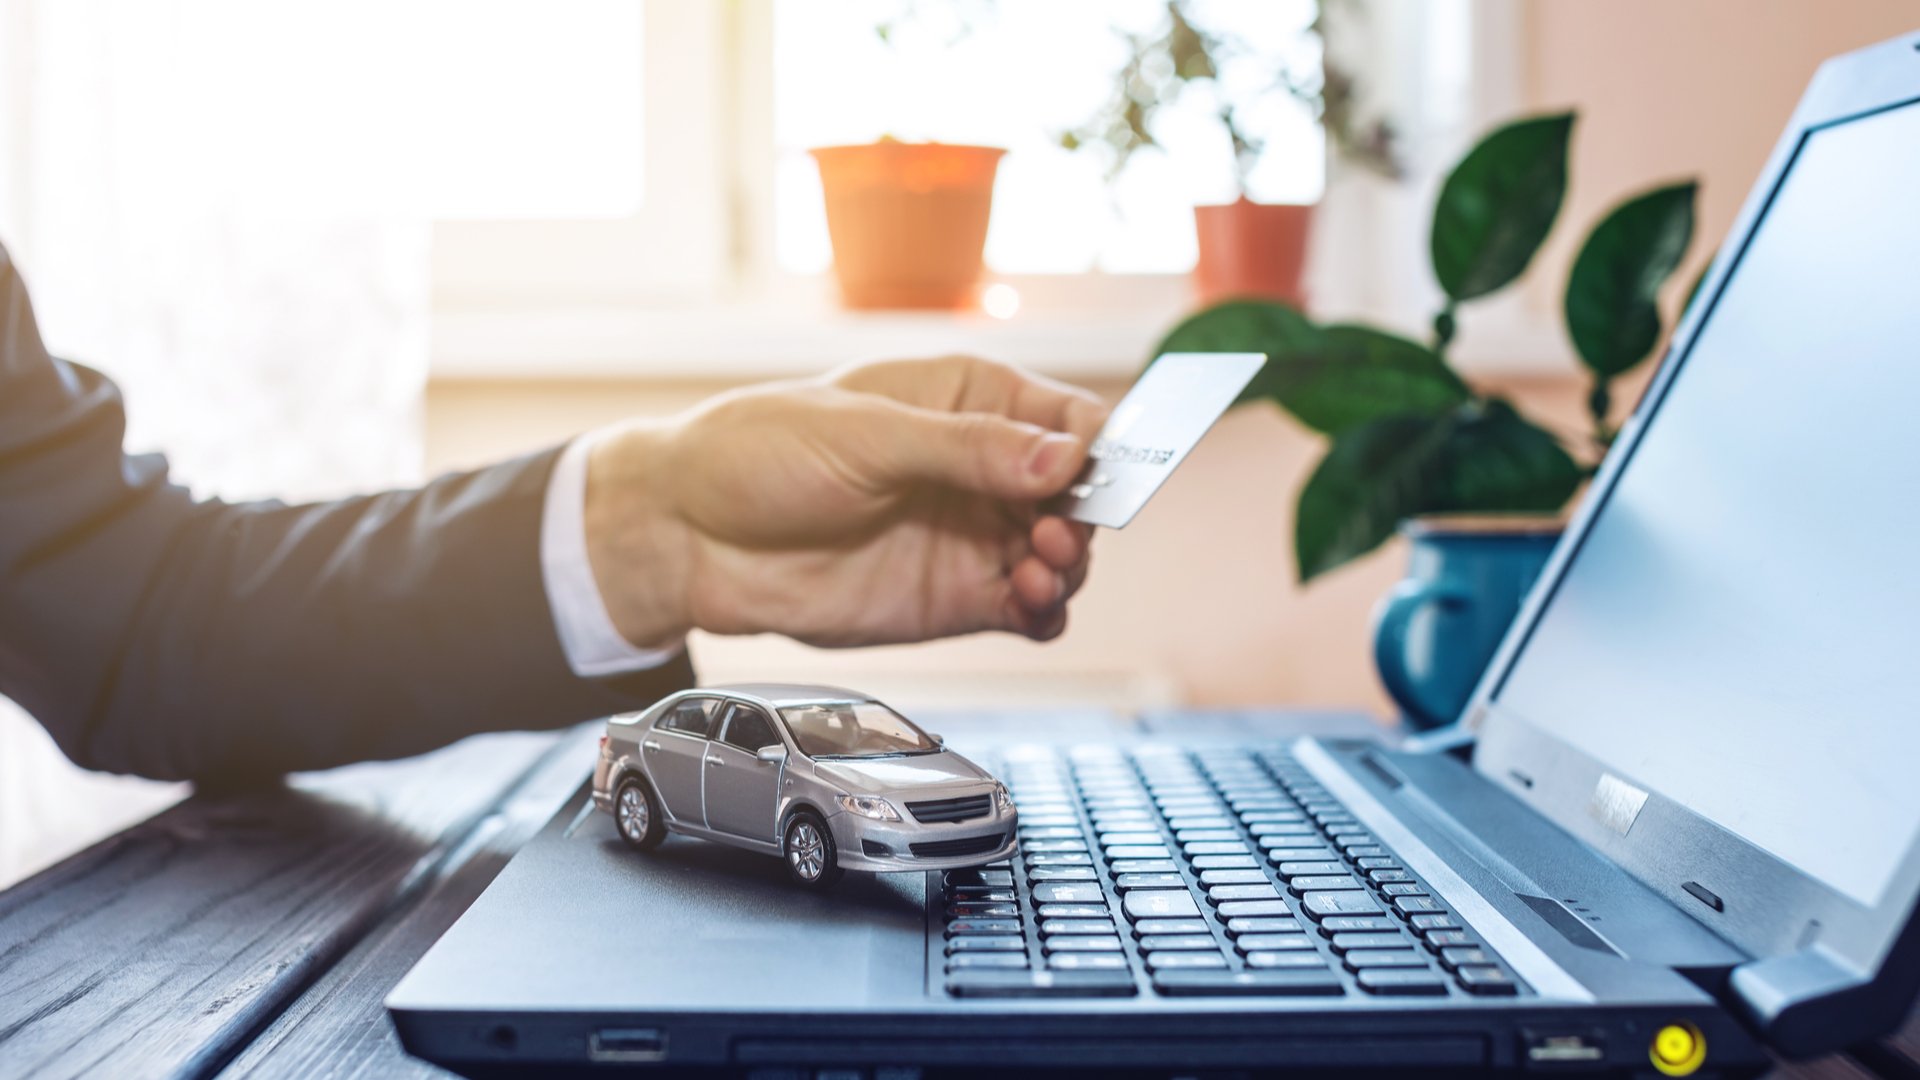 5 new purchasing car online trends